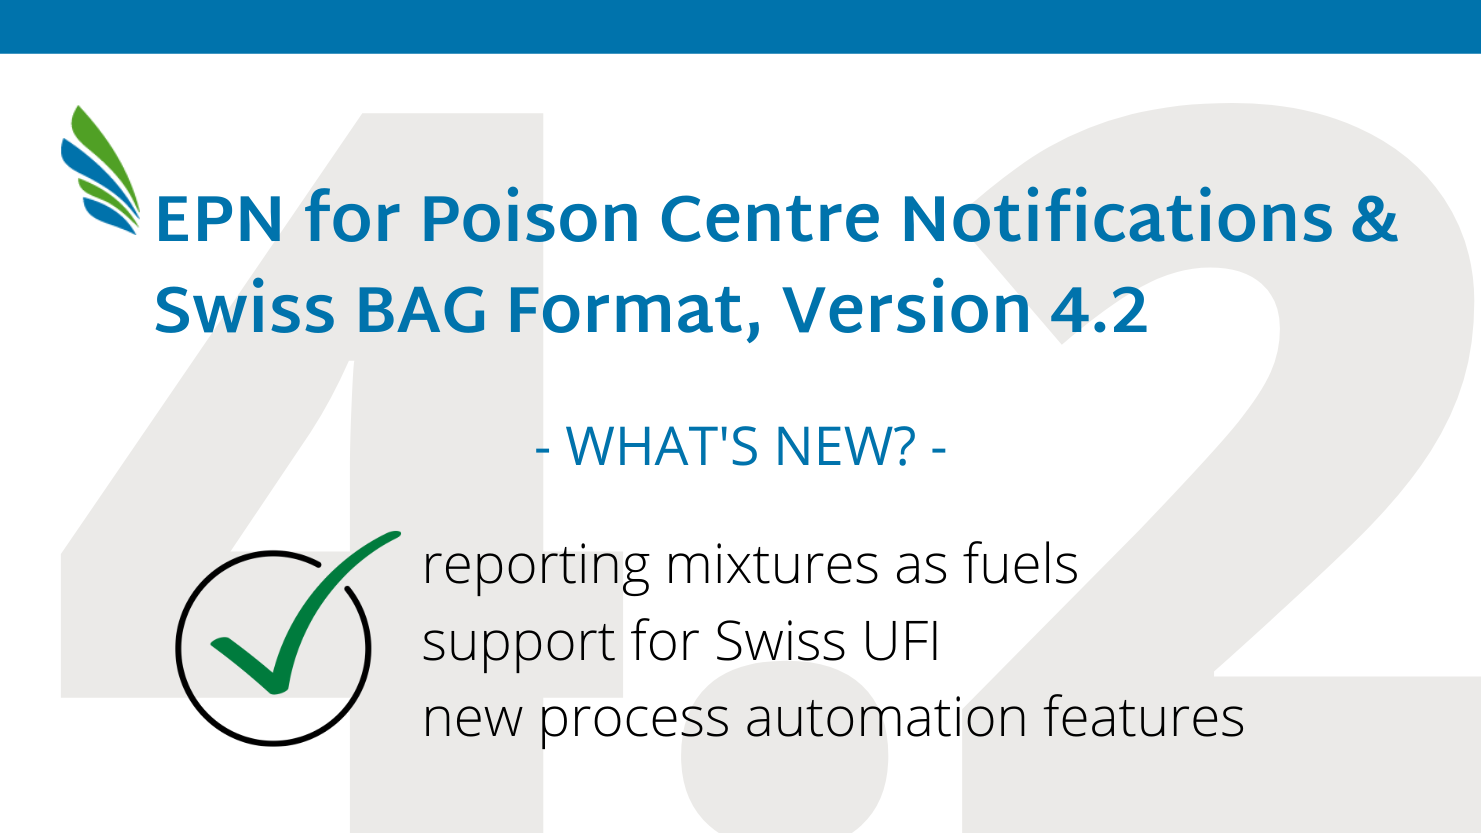 Release of opesus EPN for the process industry PCN and Swiss UFI